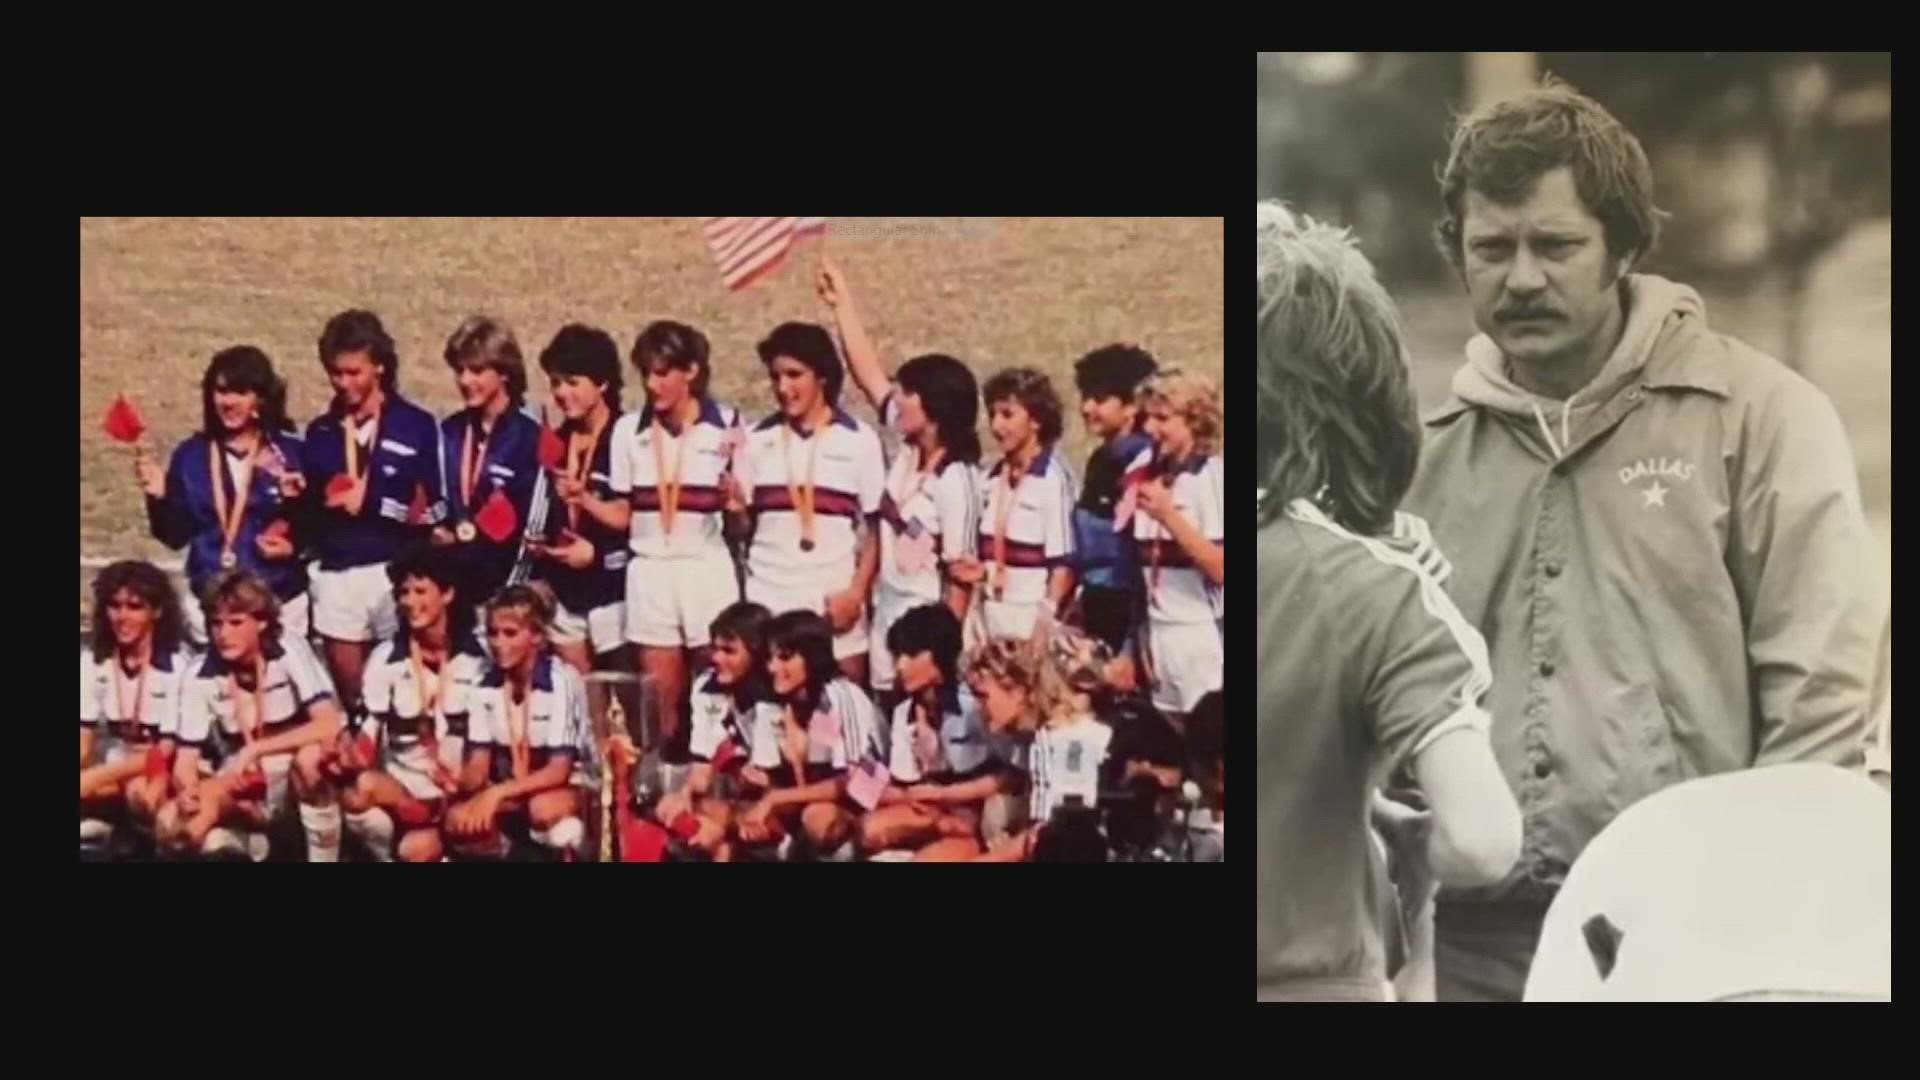 The film about the 1984 girls soccer team was almost fully cast and slated to begin production soon.